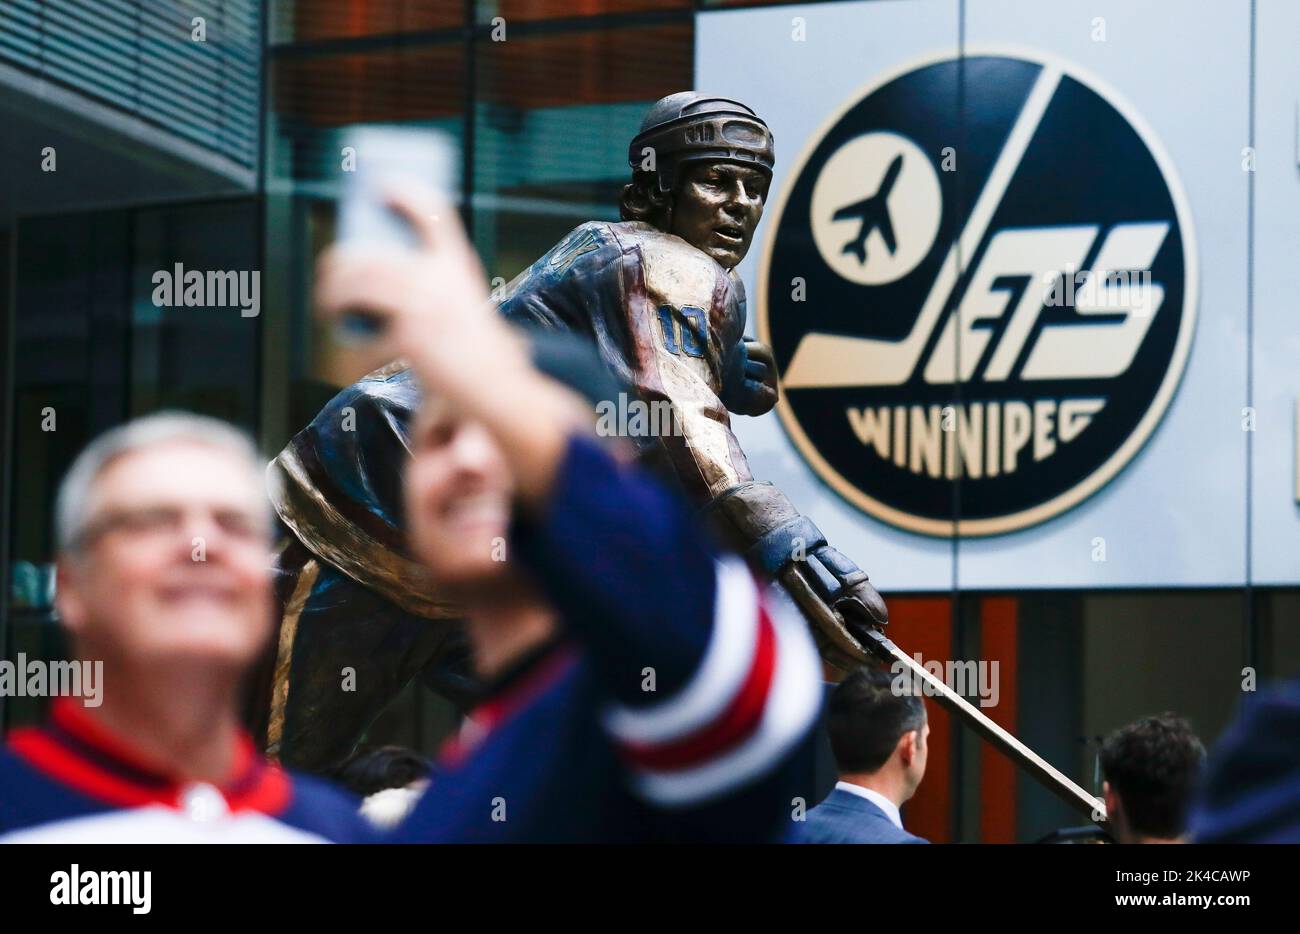 A statue in honour of former Winnipeg Jets player Dale Hawerchuk